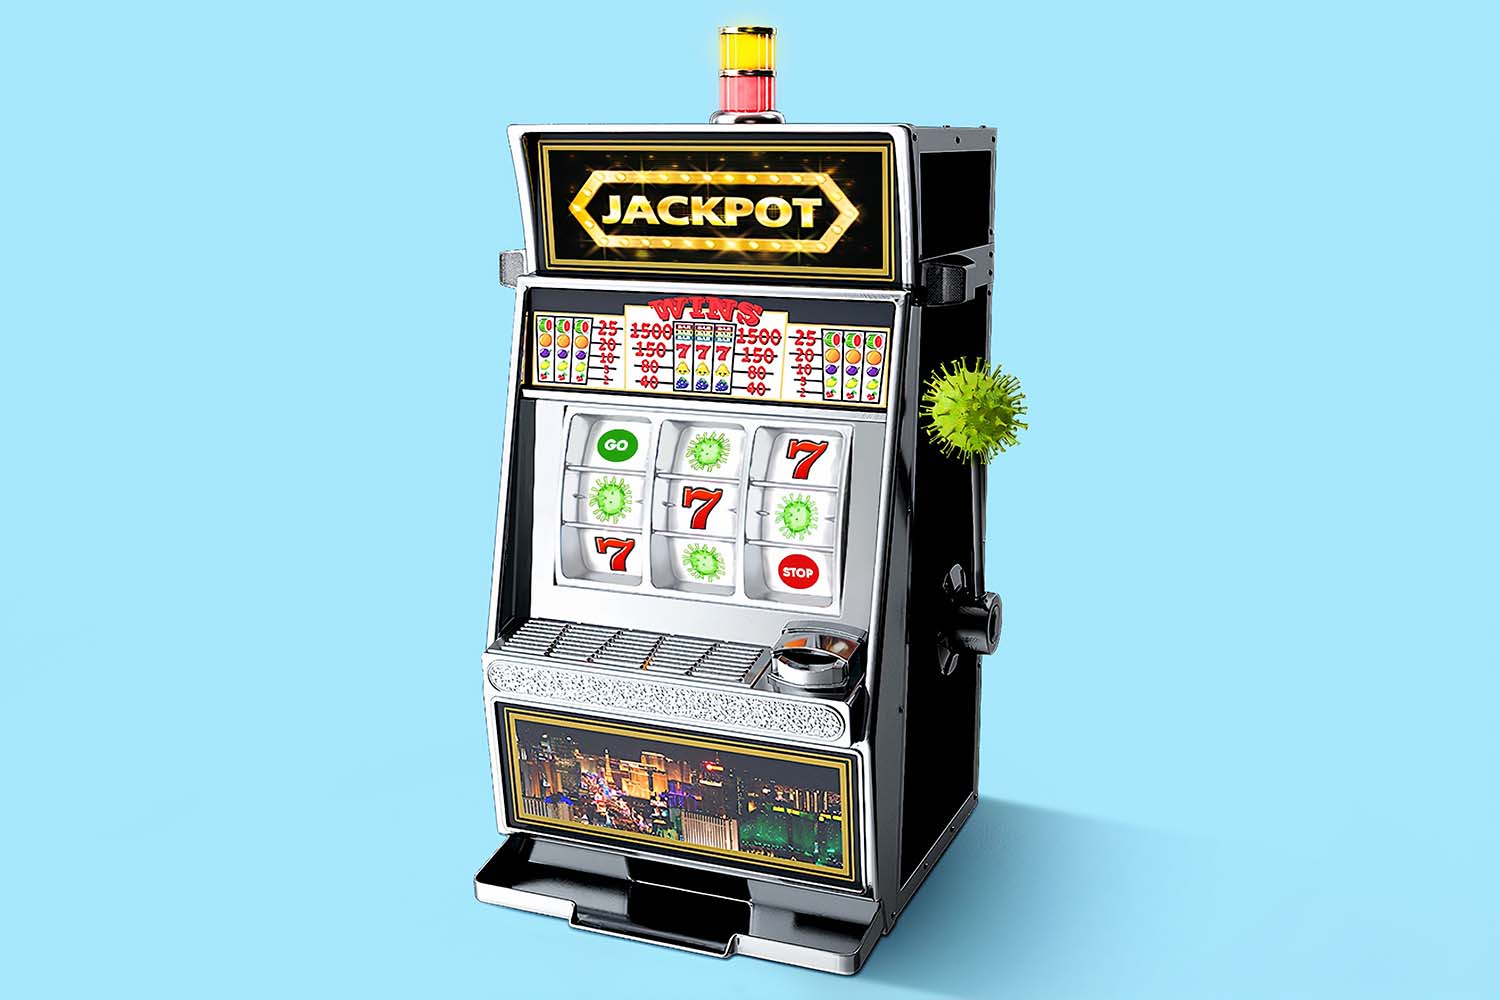 How can you increase your chances of winning at the slot machines?